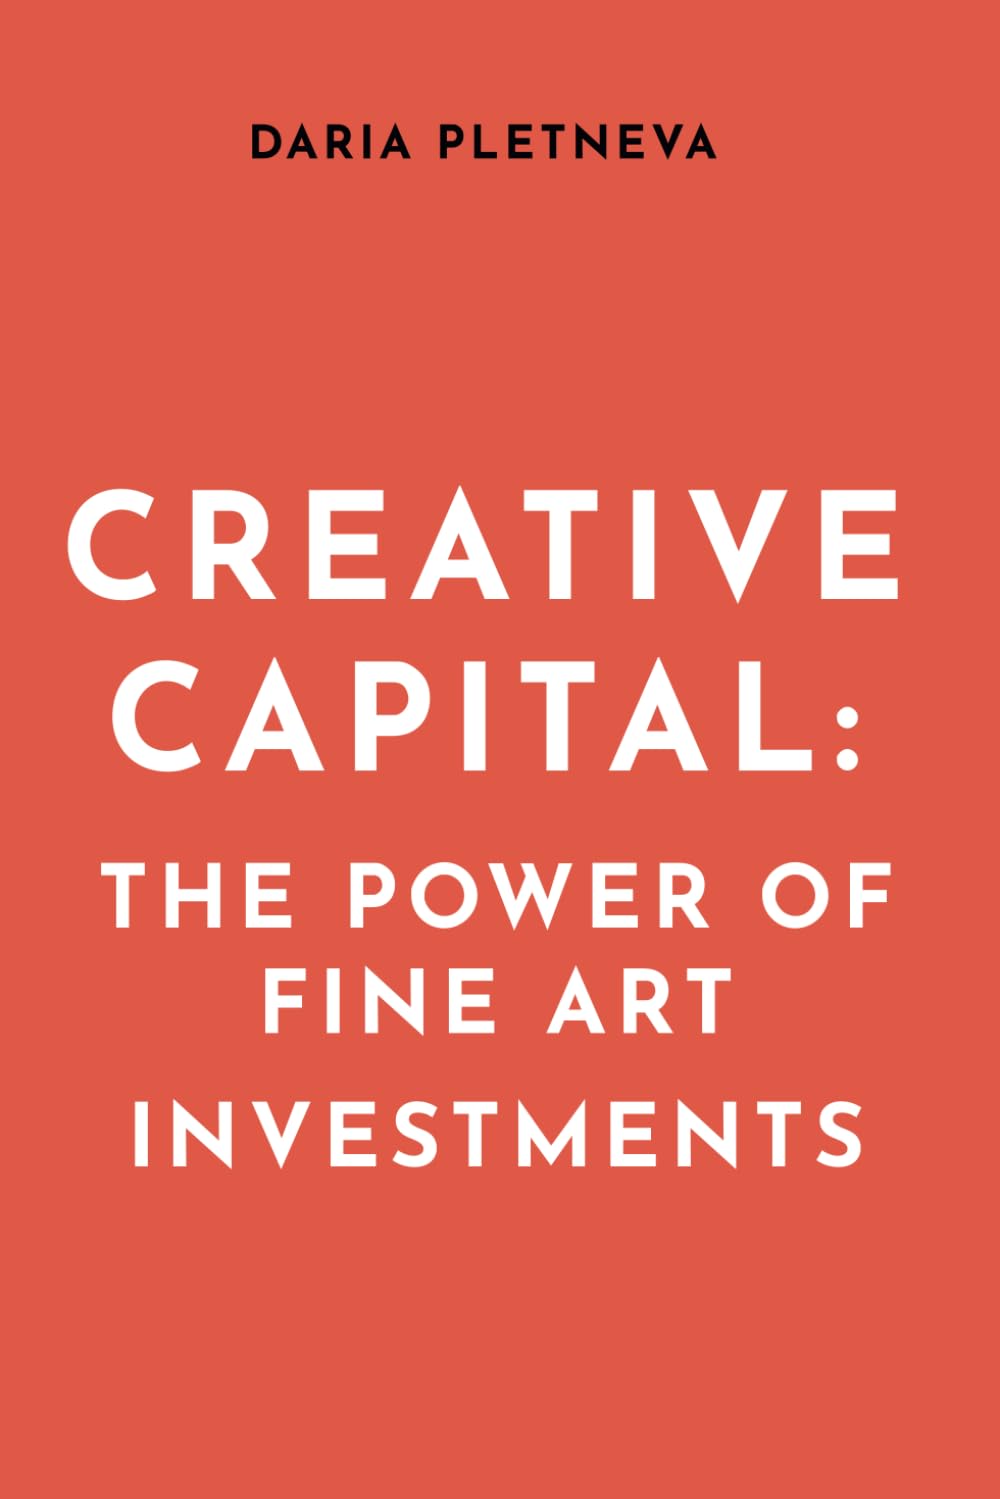 Creative Capital: The Power of Fine Art Investments